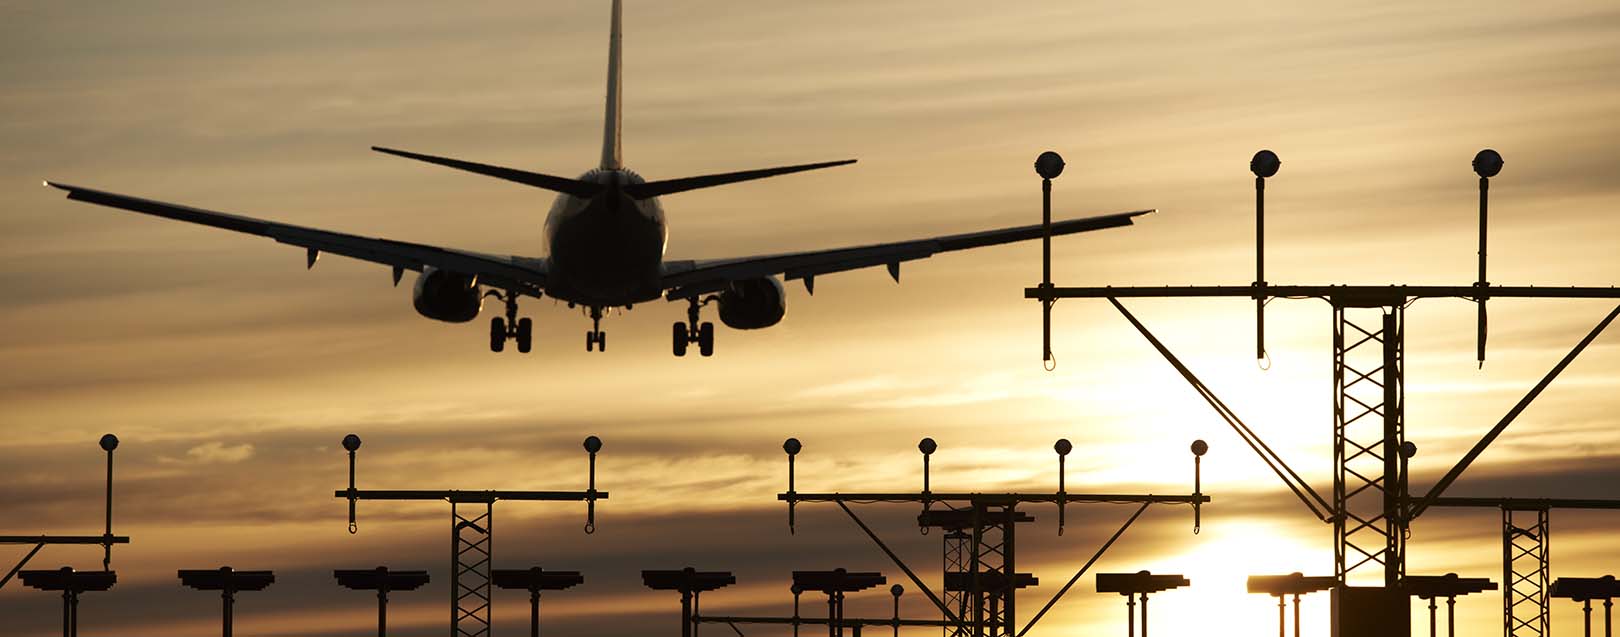 Civil aviation policy to address various issues